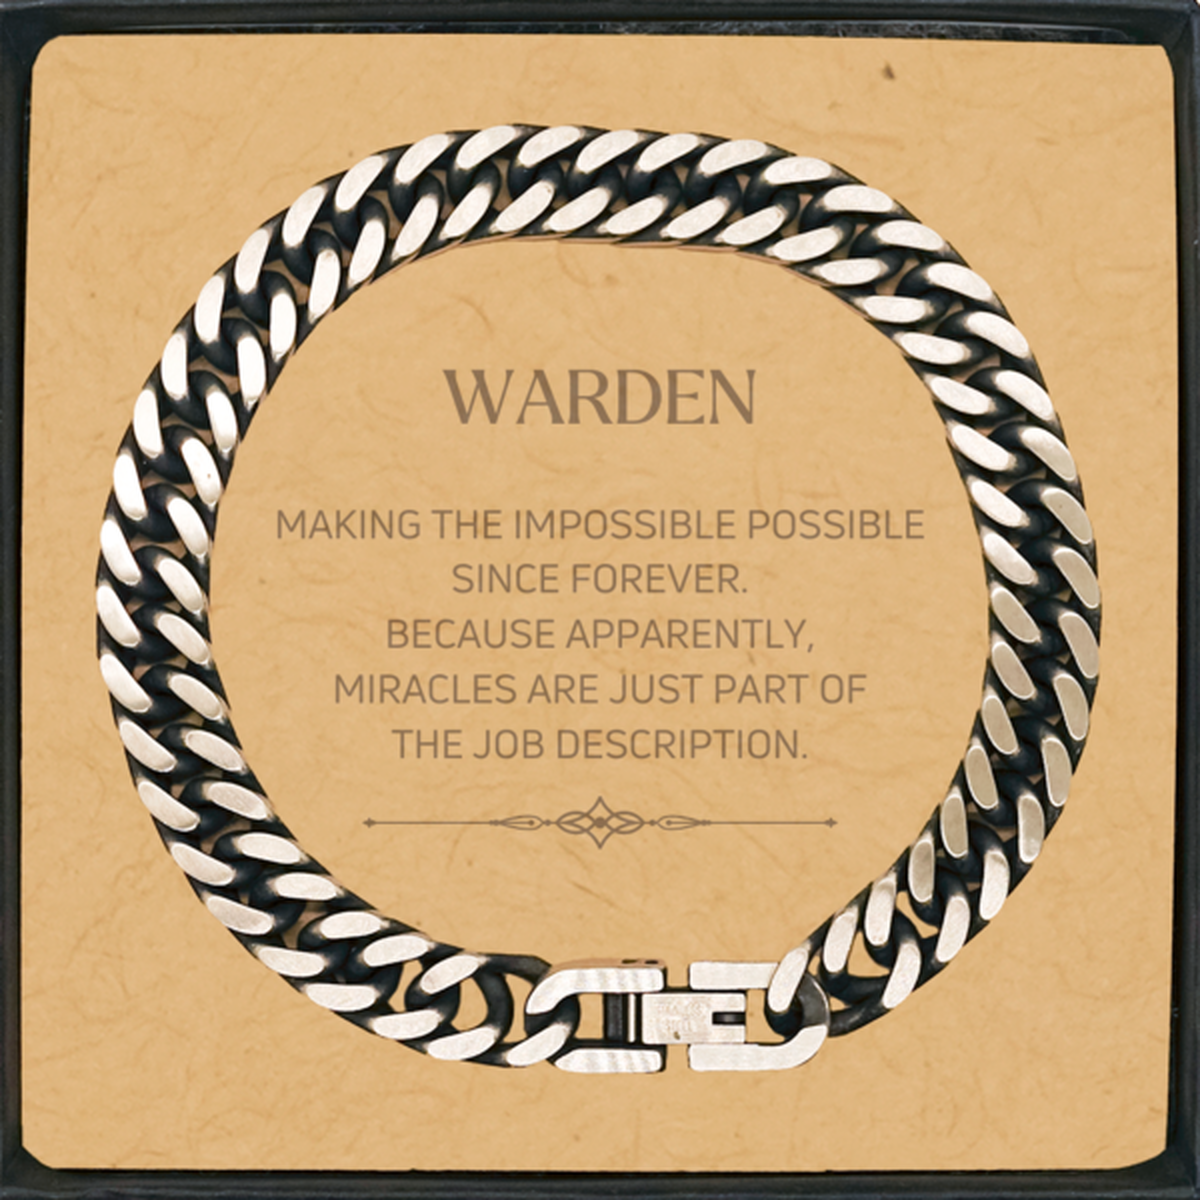 Funny Warden Gifts, Miracles are just part of the job description, Inspirational Birthday Cuban Link Chain Bracelet For Warden, Men, Women, Coworkers, Friends, Boss